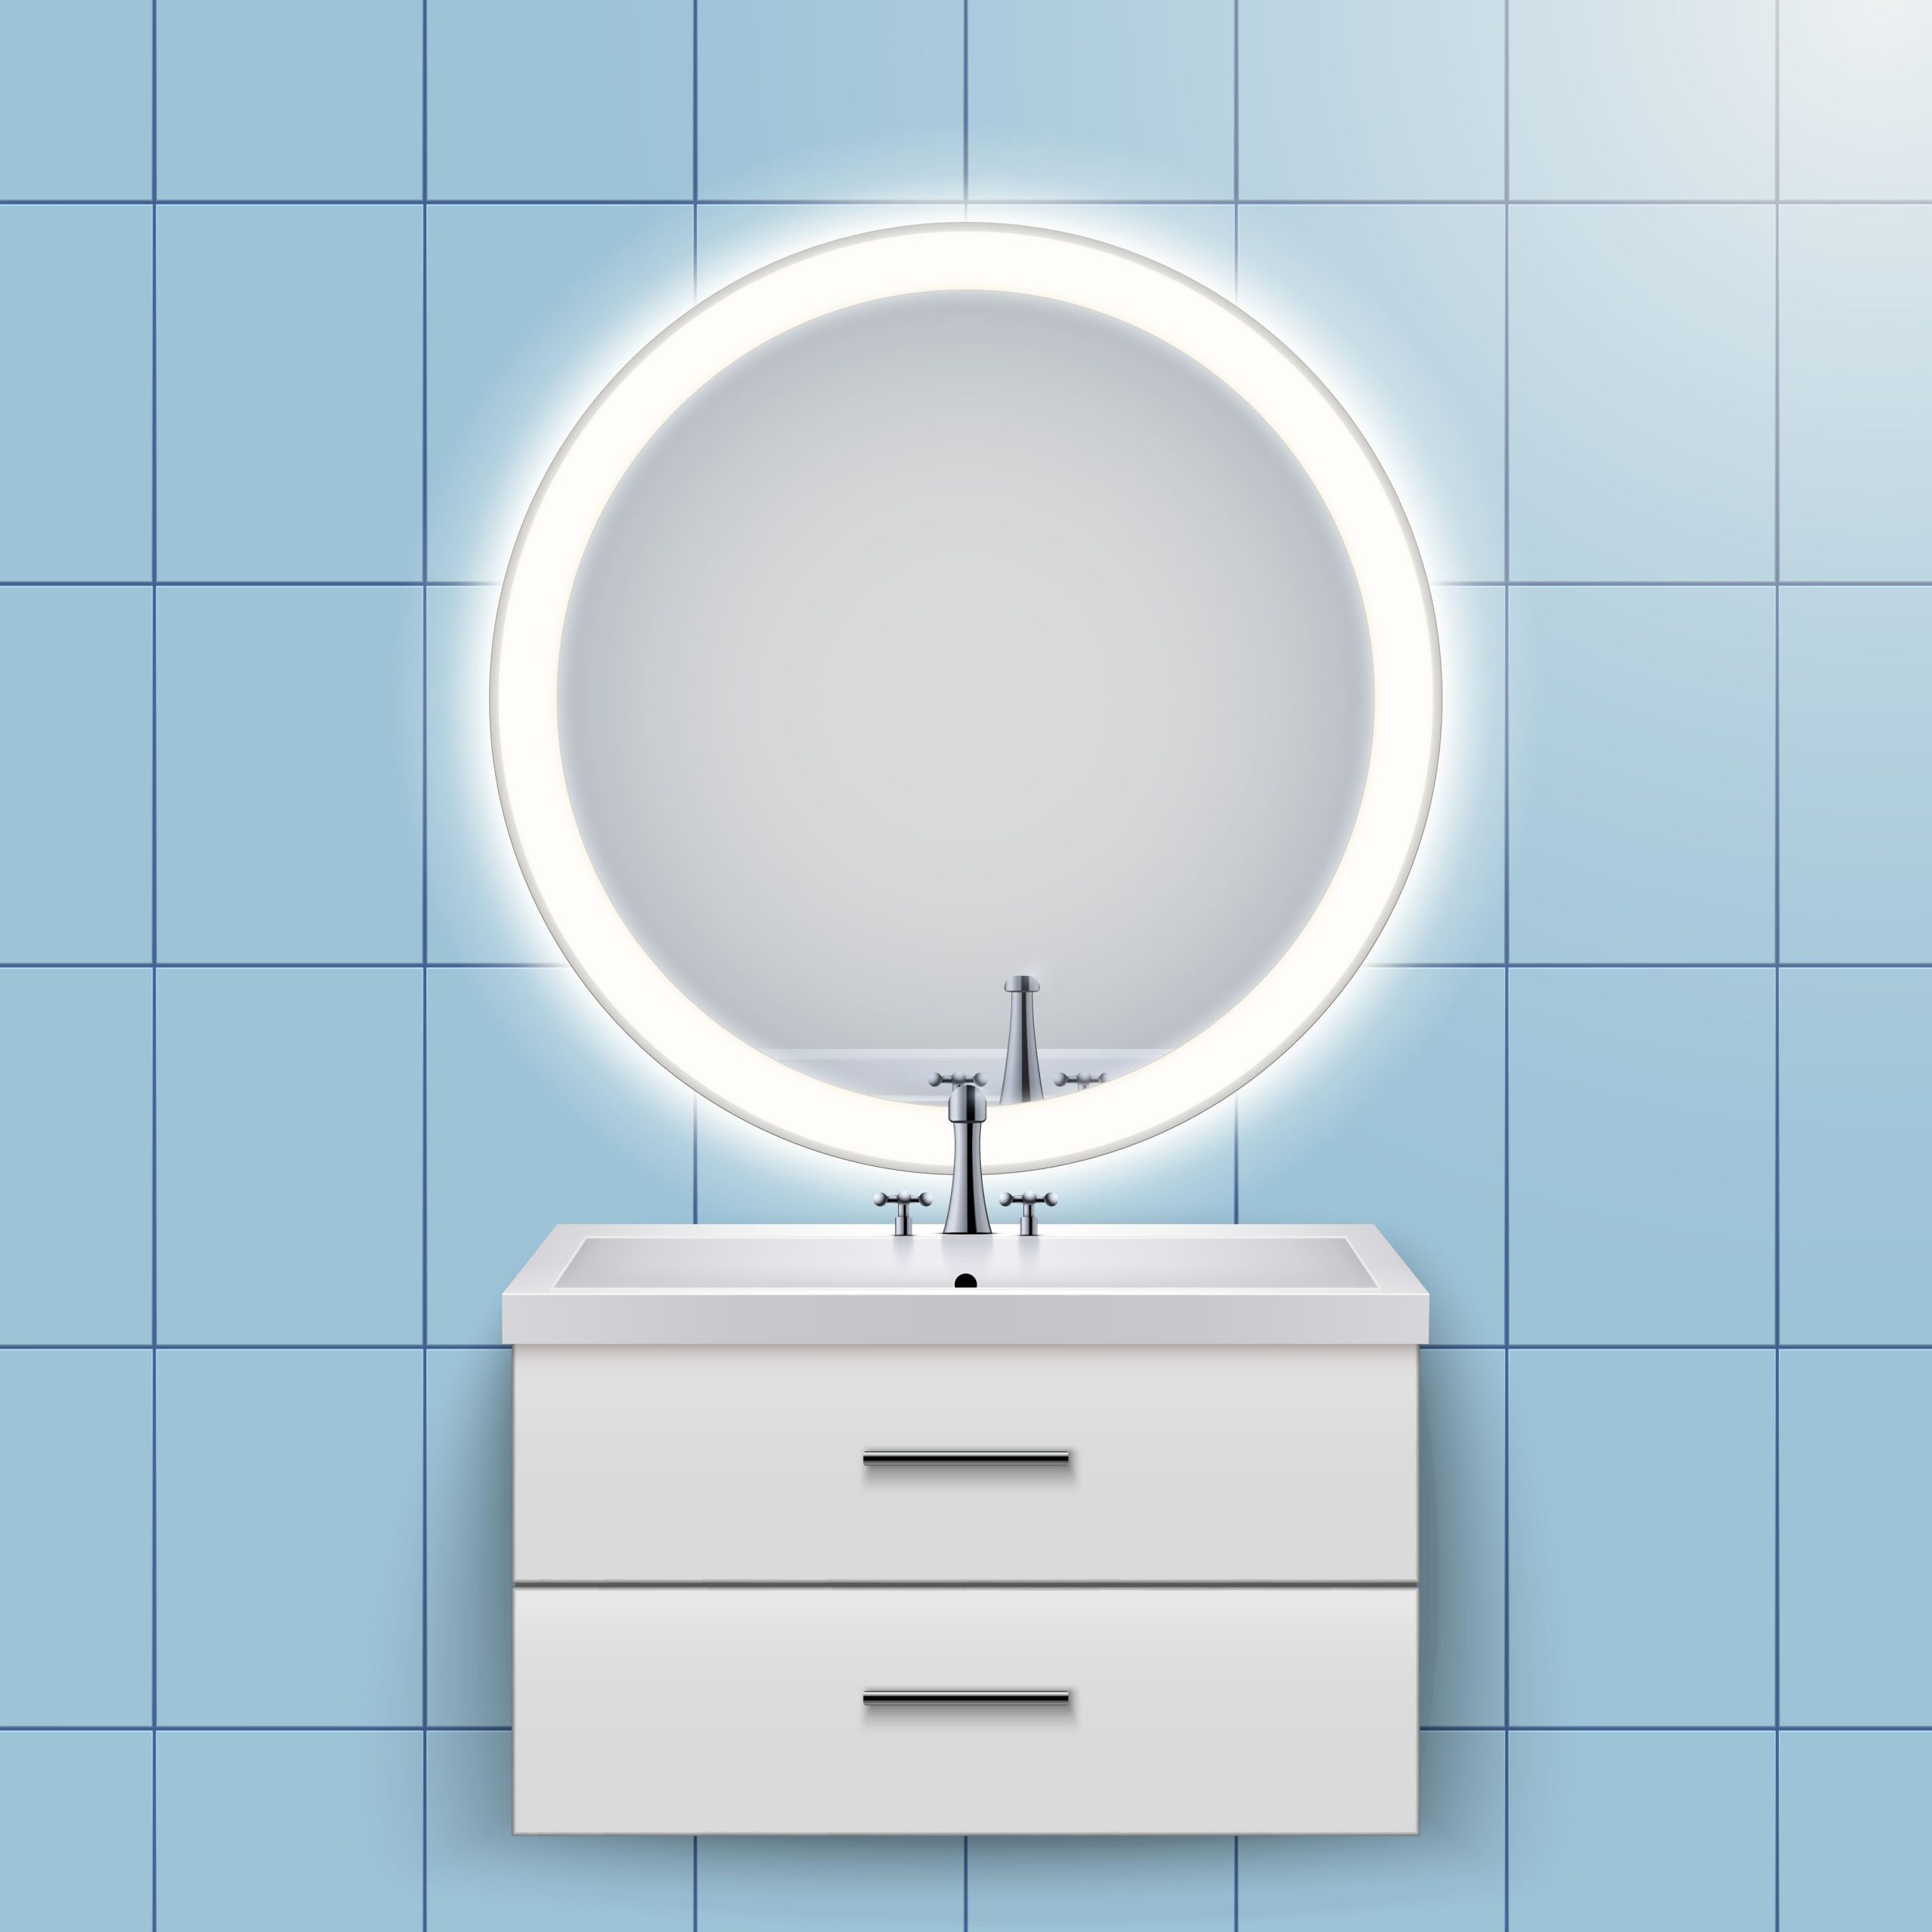 Try This LED Mirror For a Change